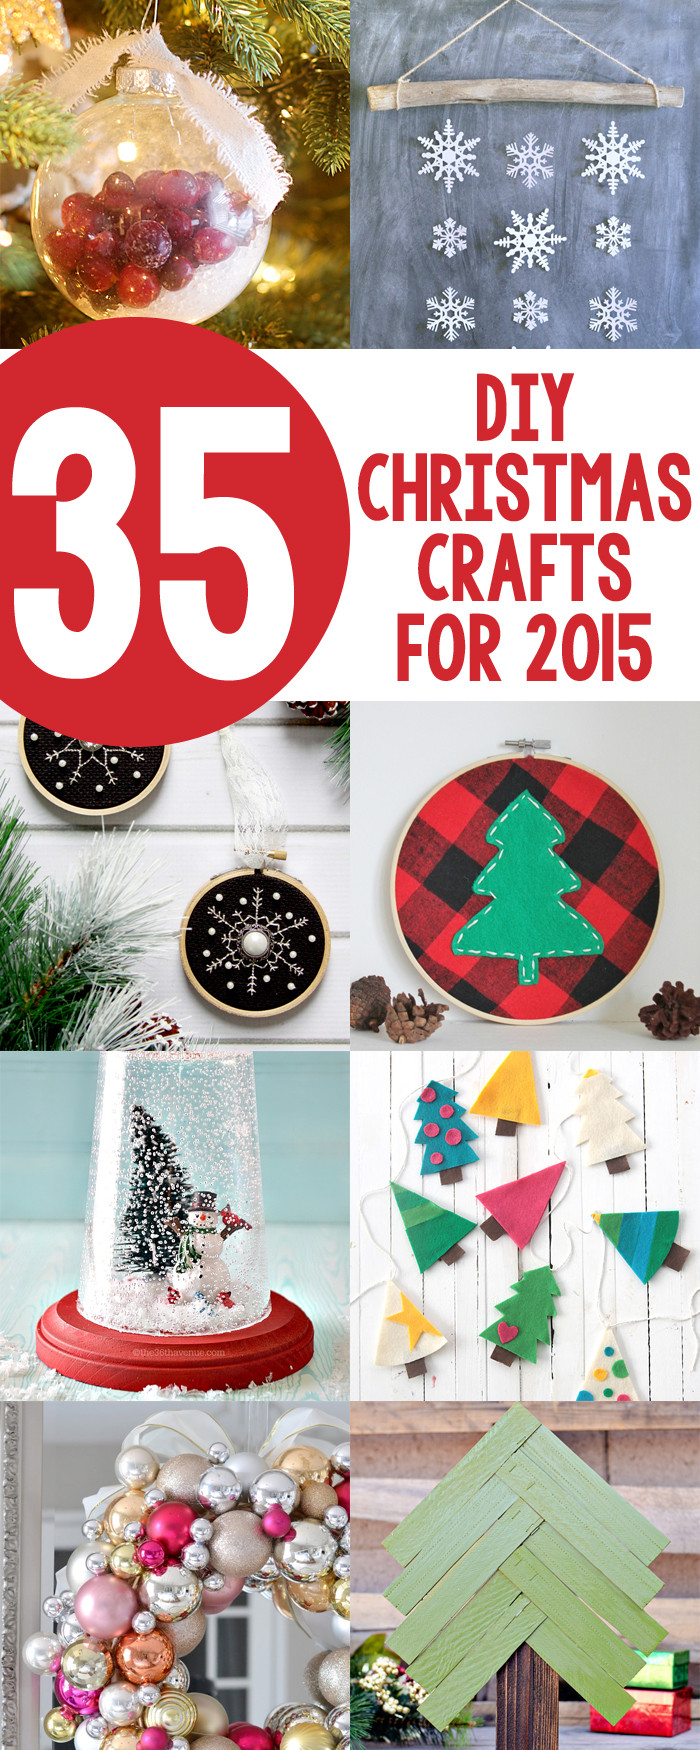 DIY Christmas Projects
 35 DIY Christmas Crafts for 2015 Yellow Bliss Road